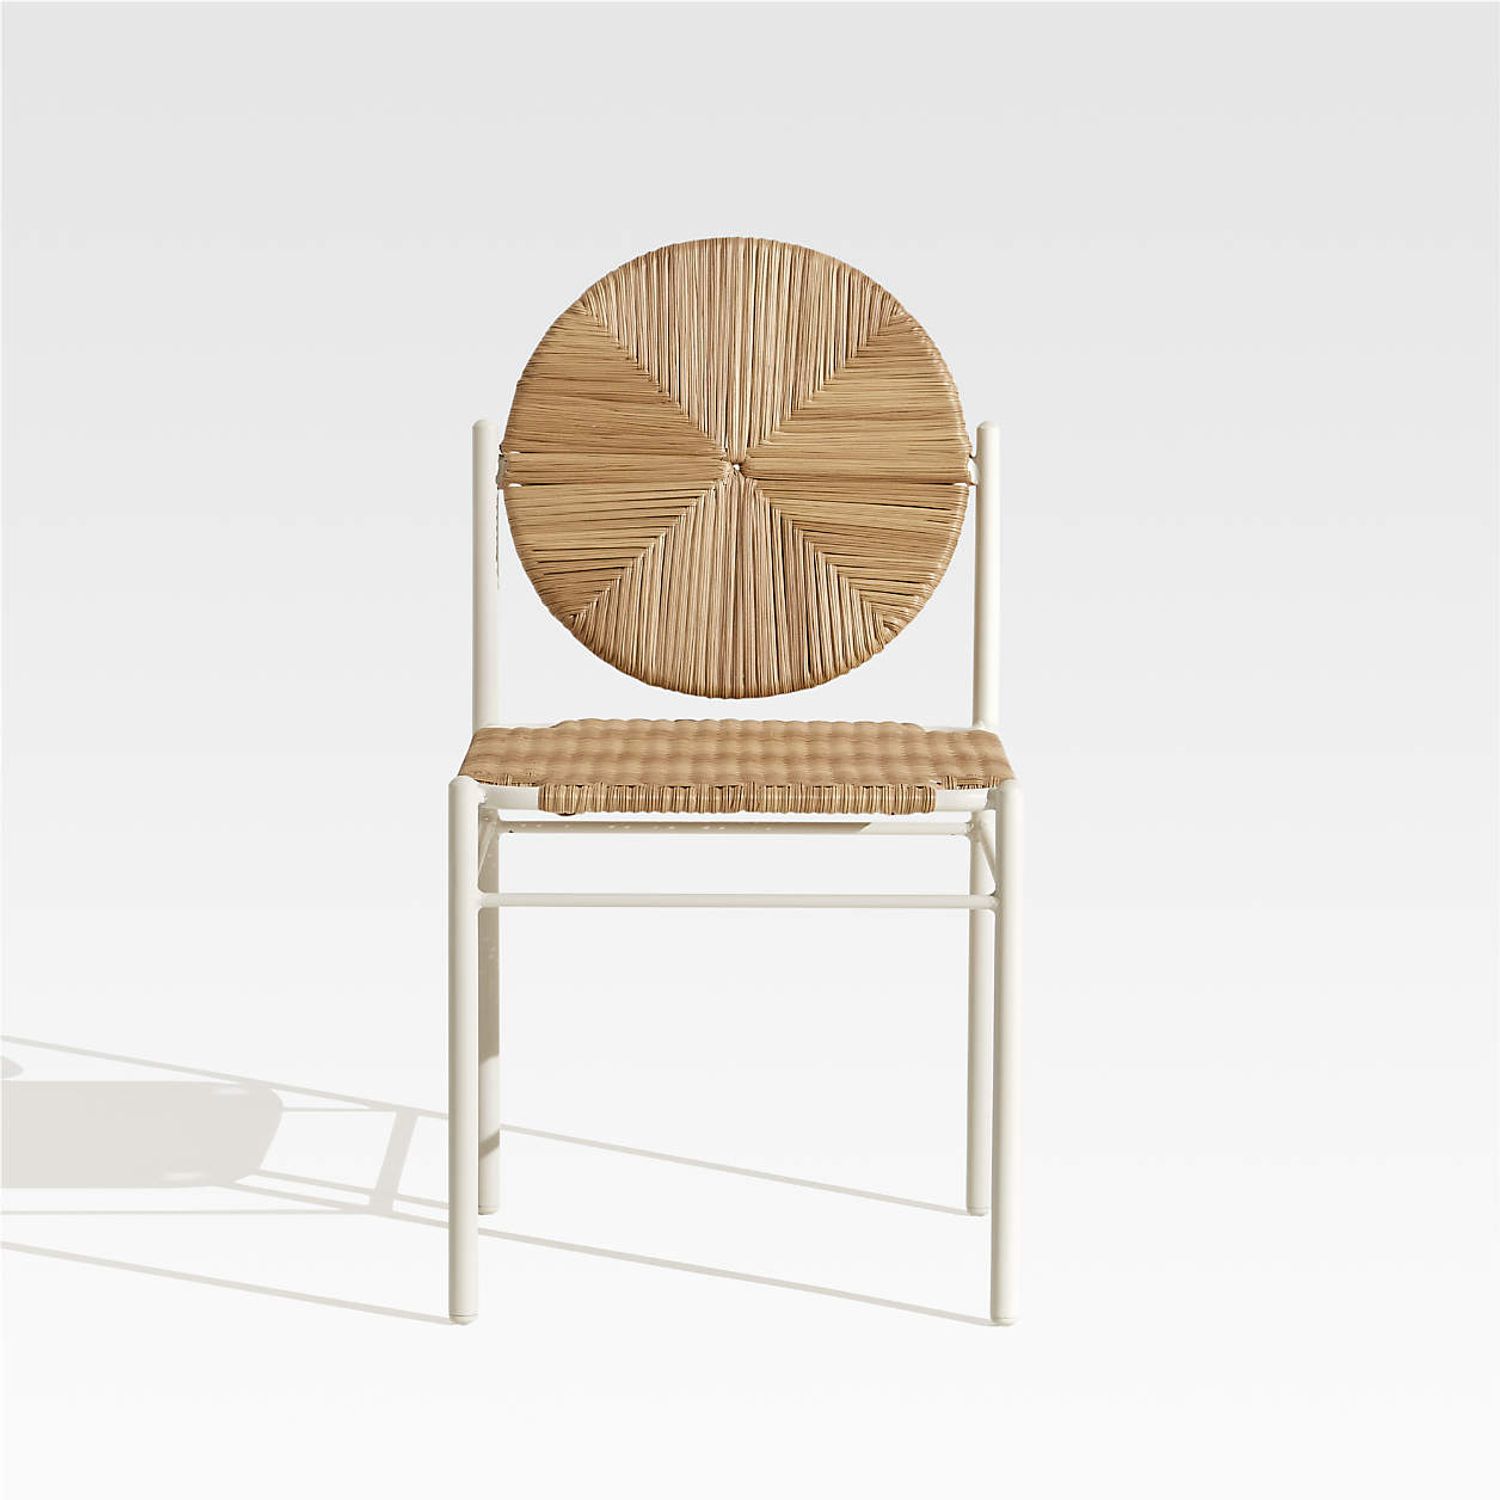 Shop Corisca Outdoor Dining Chair  from Crate and Barrel on Openhaus